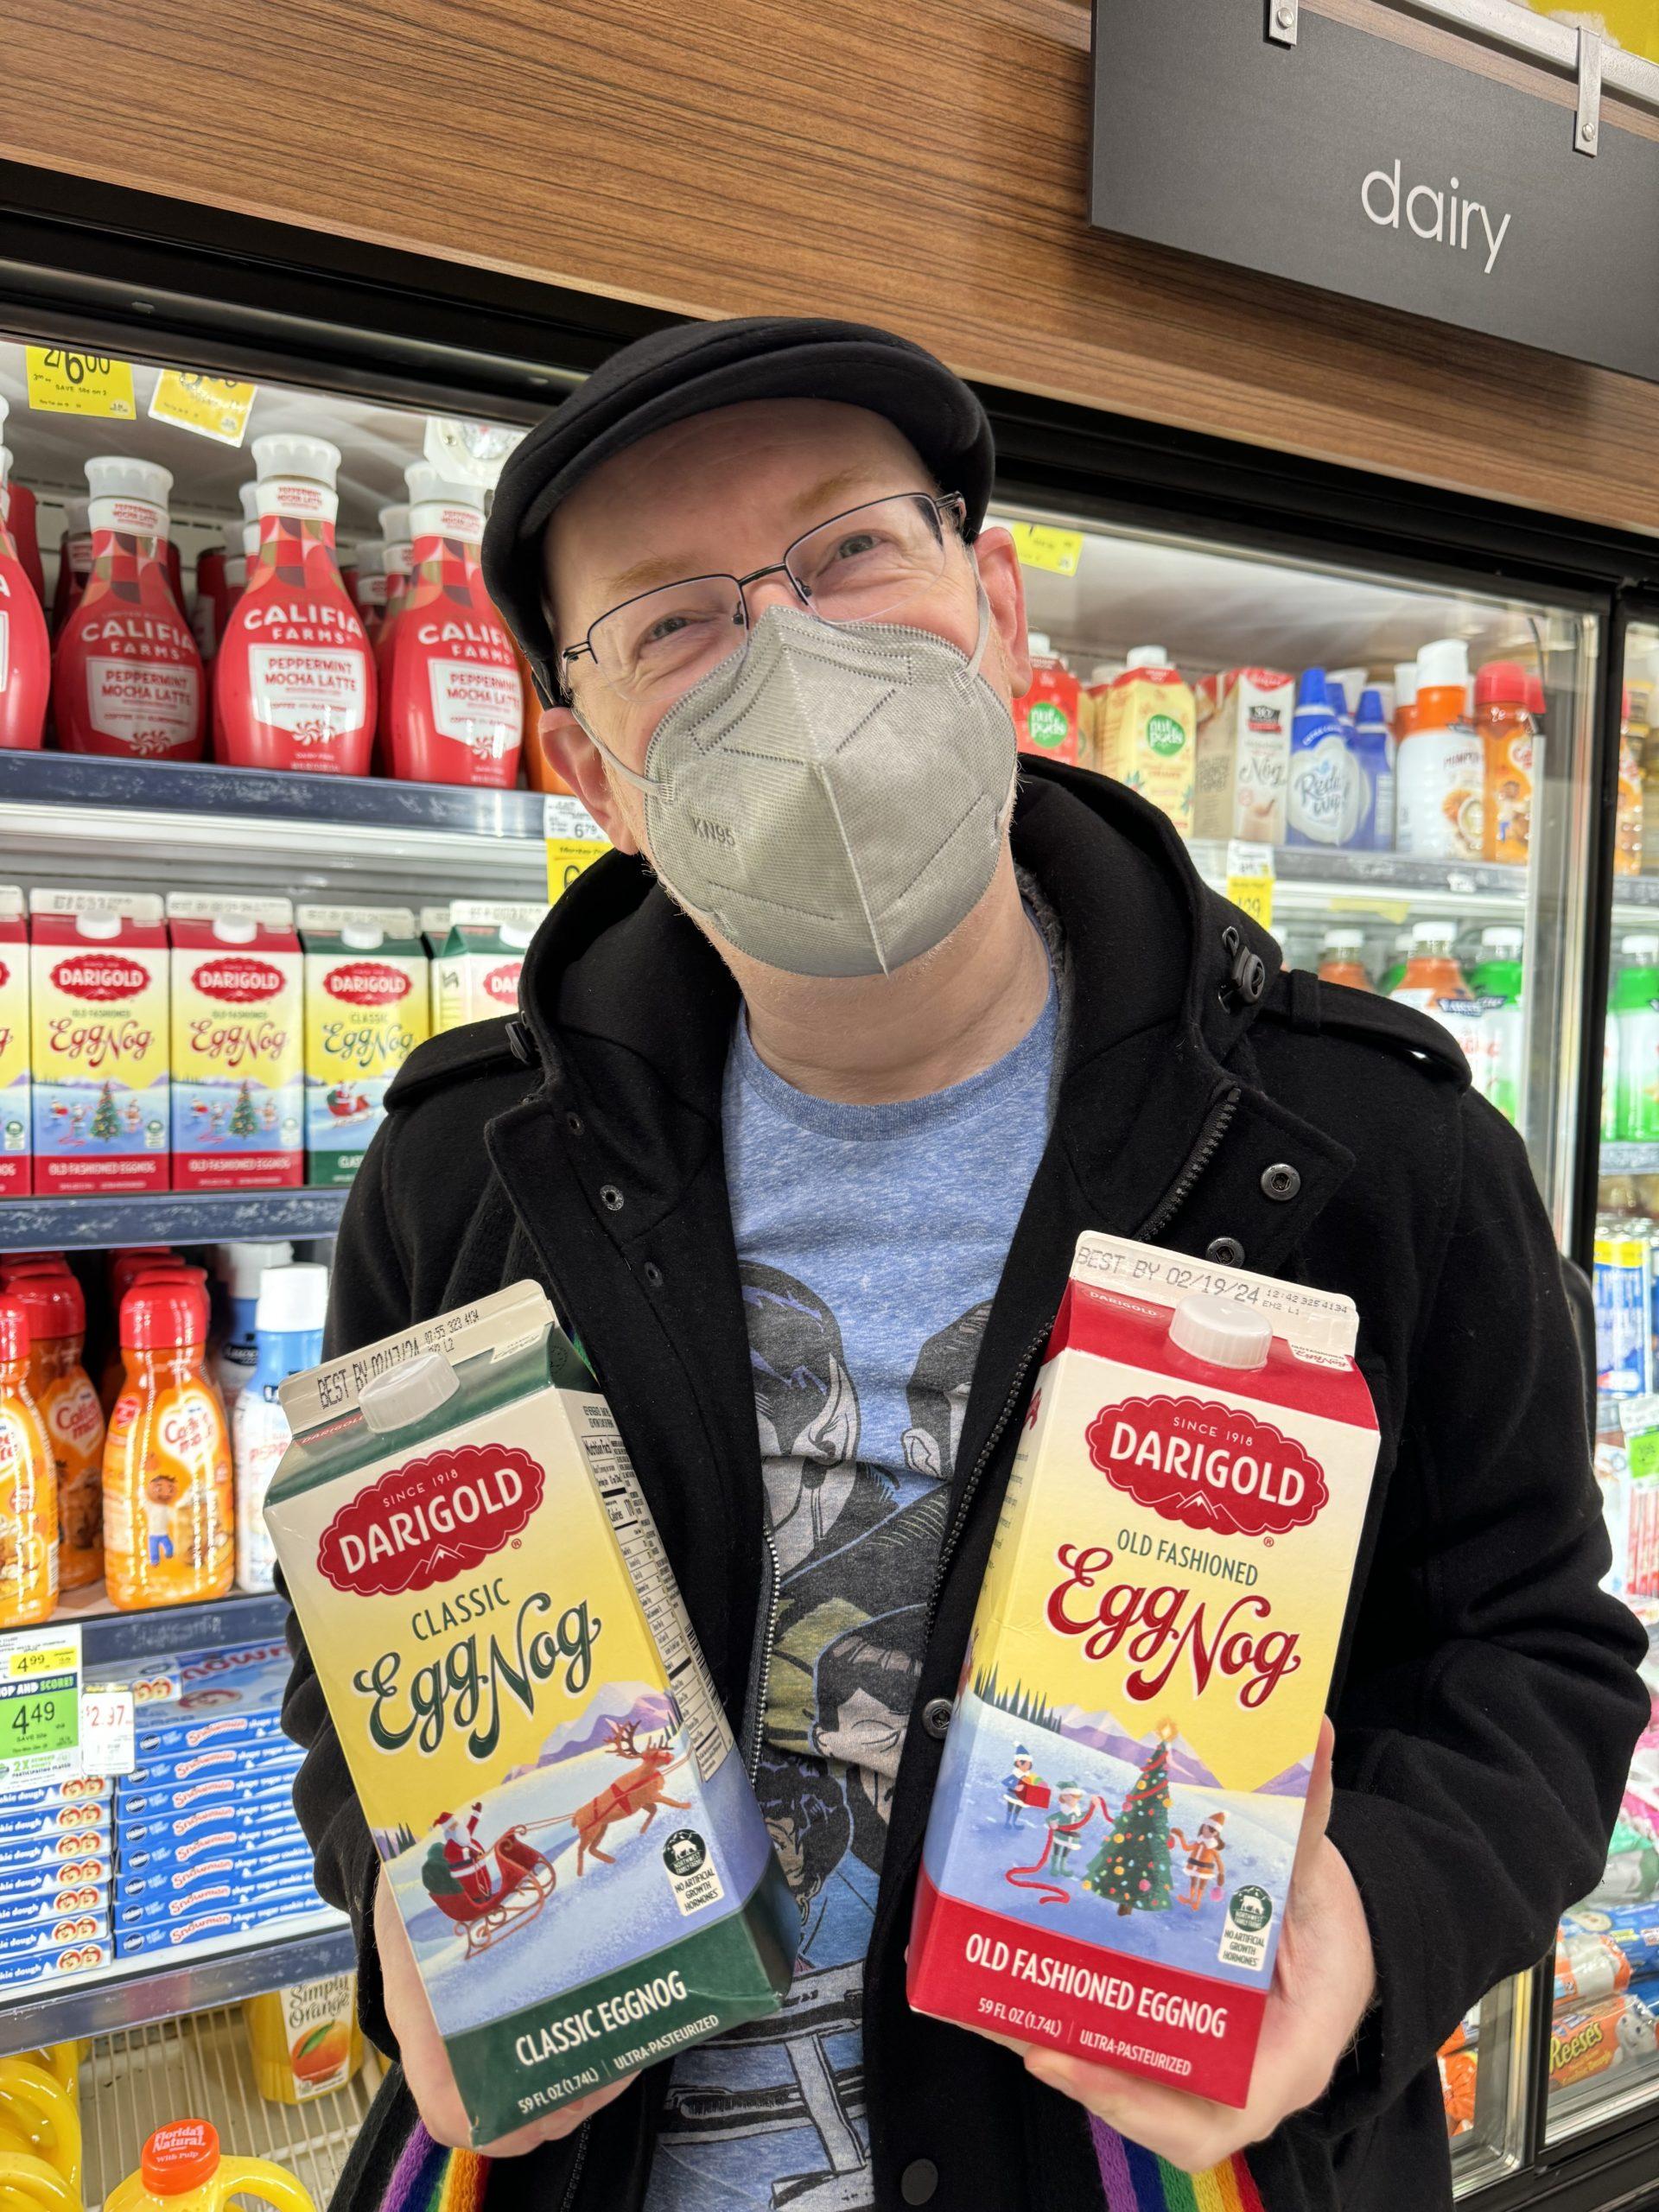 Me (masked) in a grocery store, with a confused expression and holding two cartons of Darigold egg nog, one labeled 'classic' and one labeled 'old fashioned'.